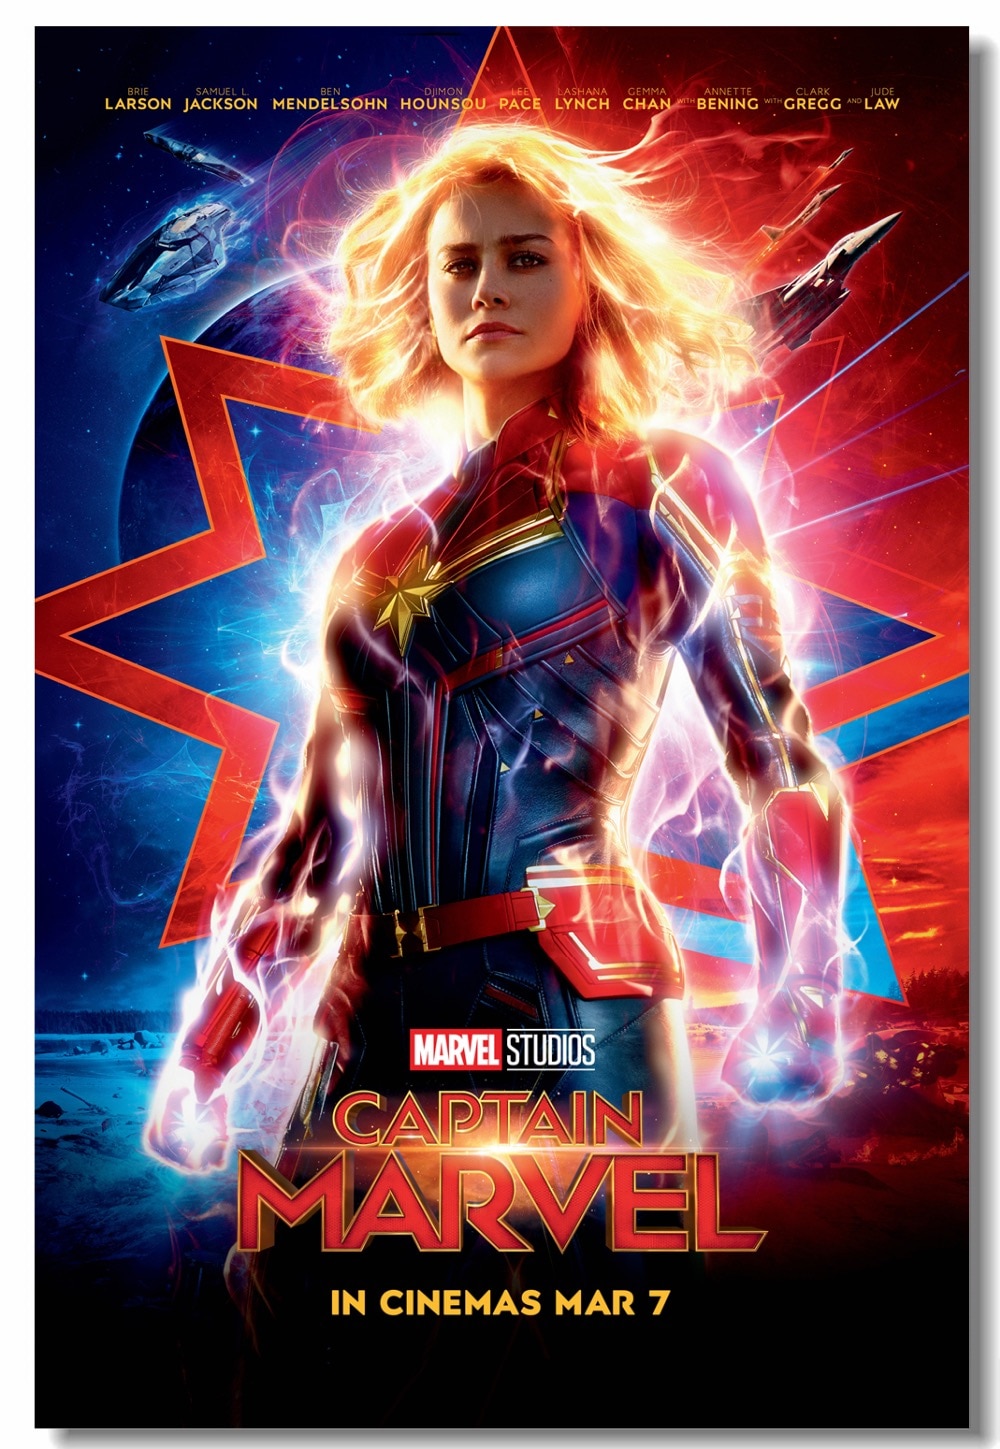 Custom Canvas Wall Decoration Captain Marvel Poster Captain Marvel Wallpaper Office Wall Stickers Mural Kid Bedroom Decals # at the price of $5.24 in aliexpress.com